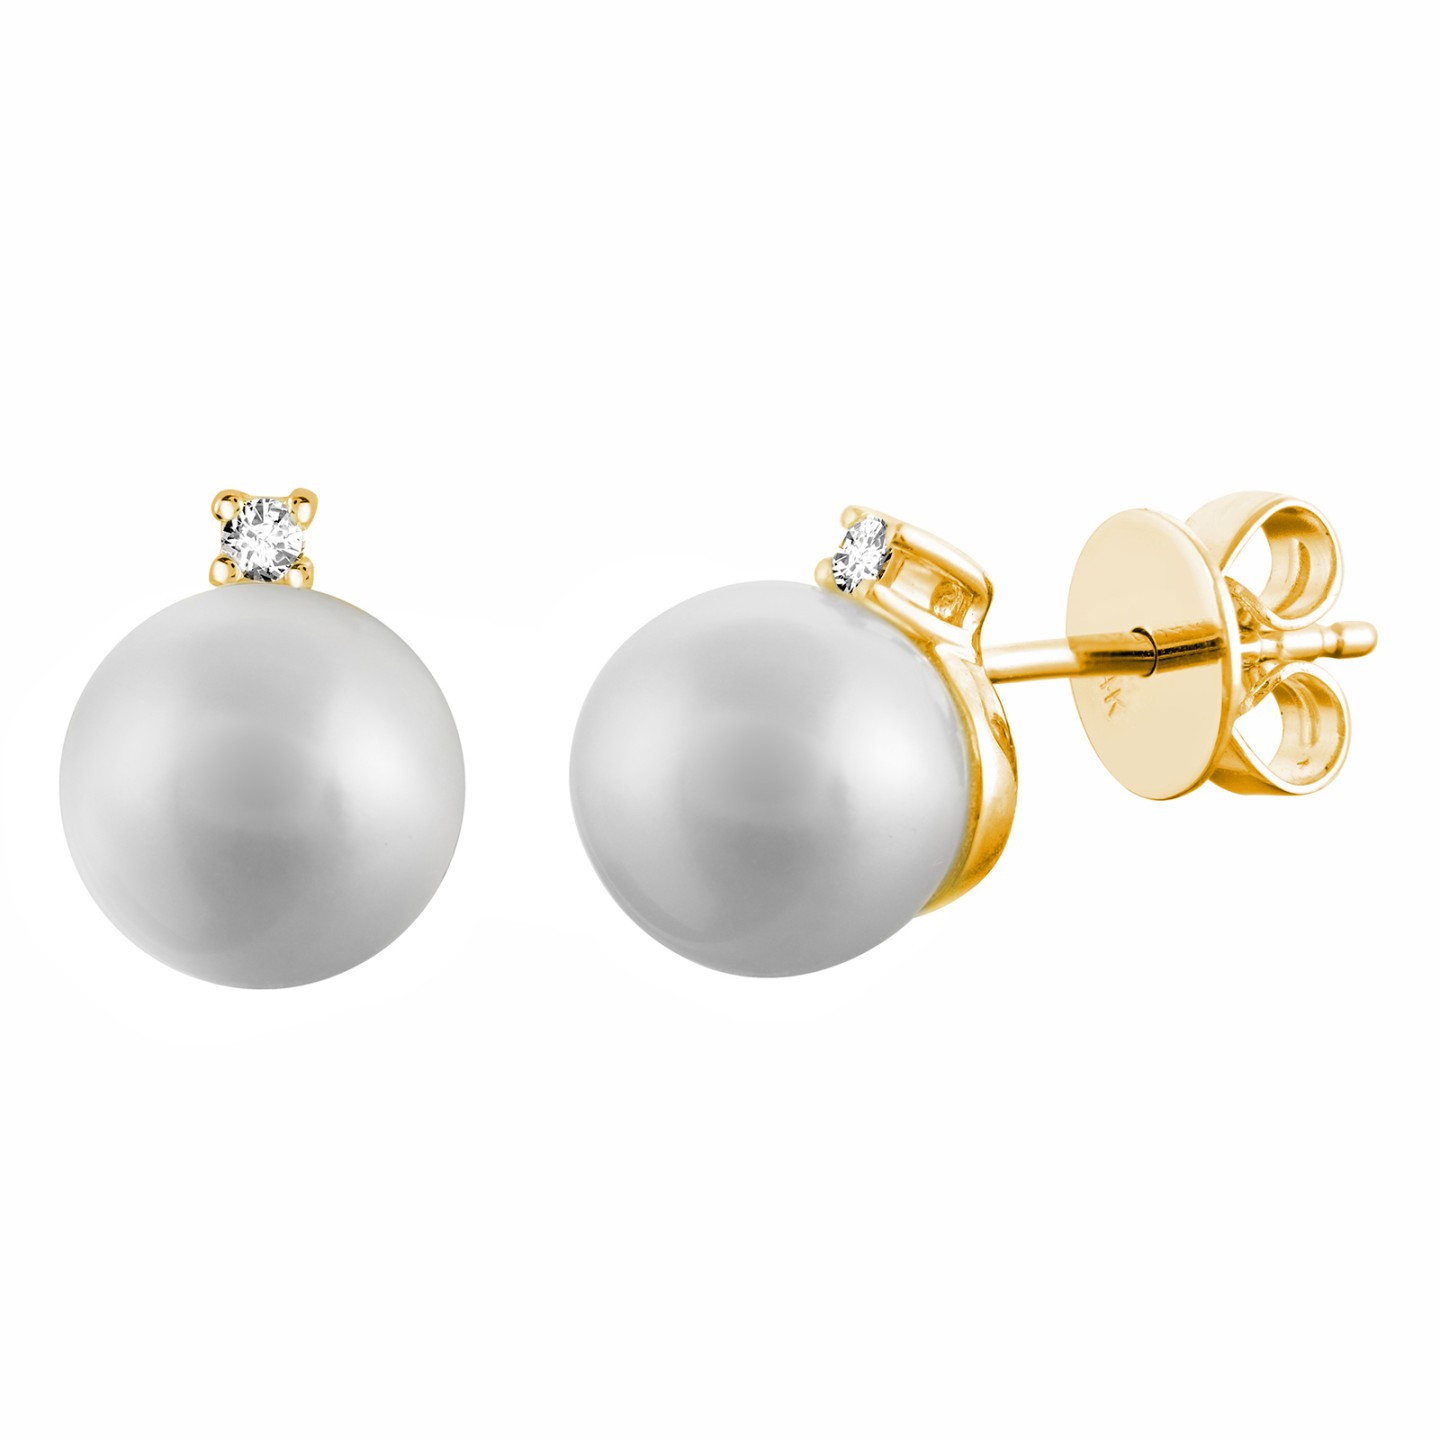 Round White Pearl Stud Earrings in 14K Yellow Gold (MV3223)